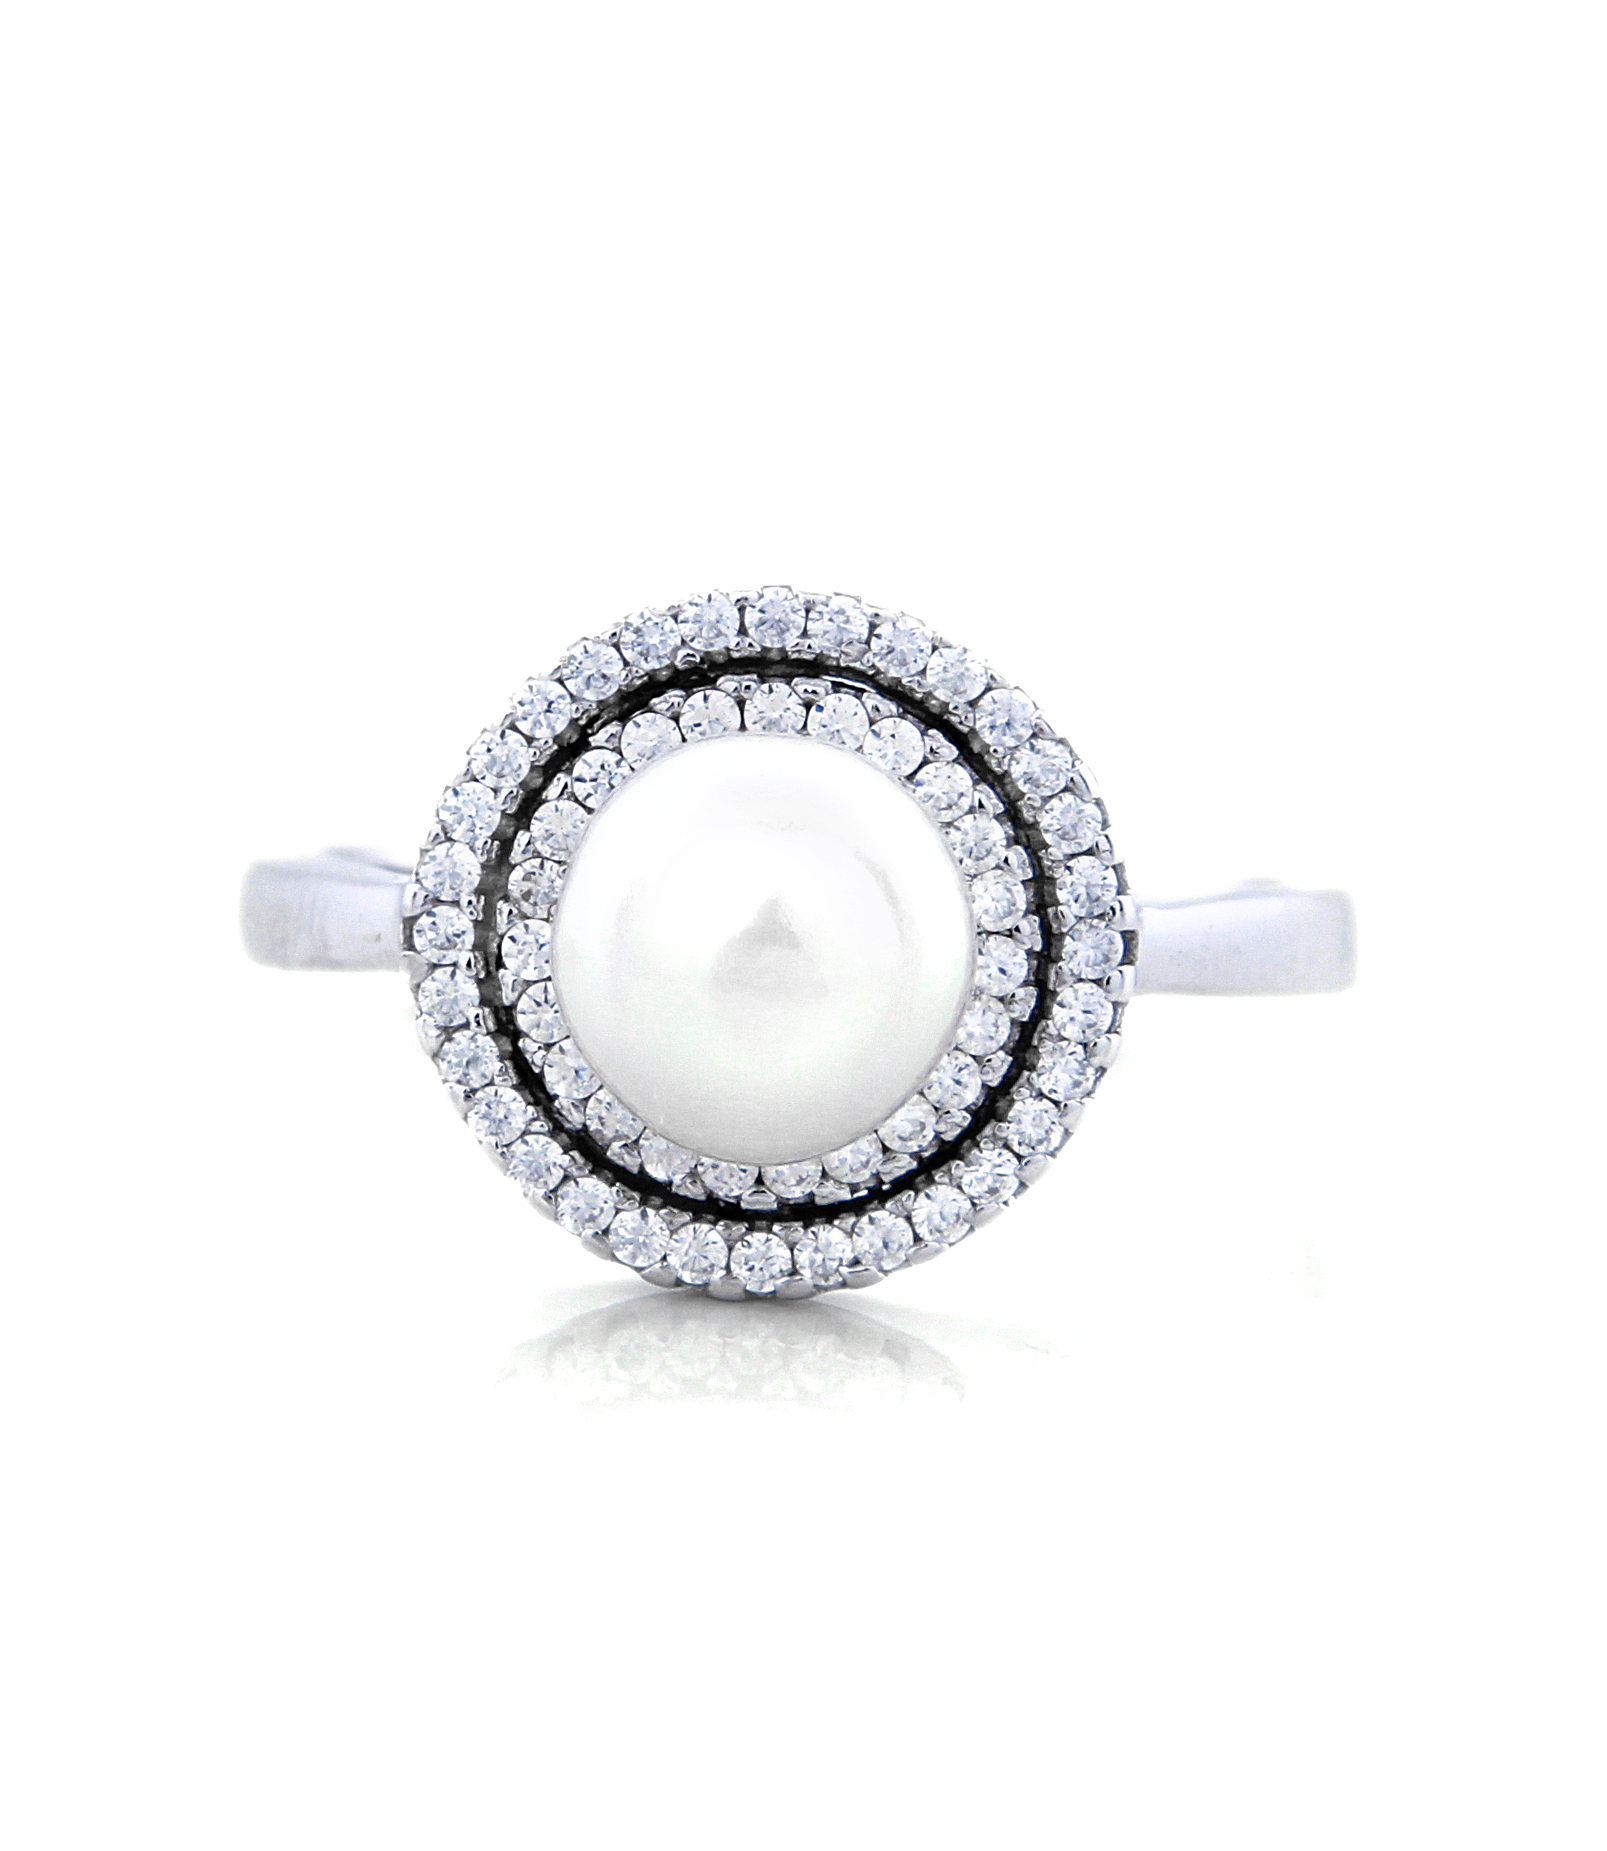 Pearl Crown Engagement Ring with Swarovski